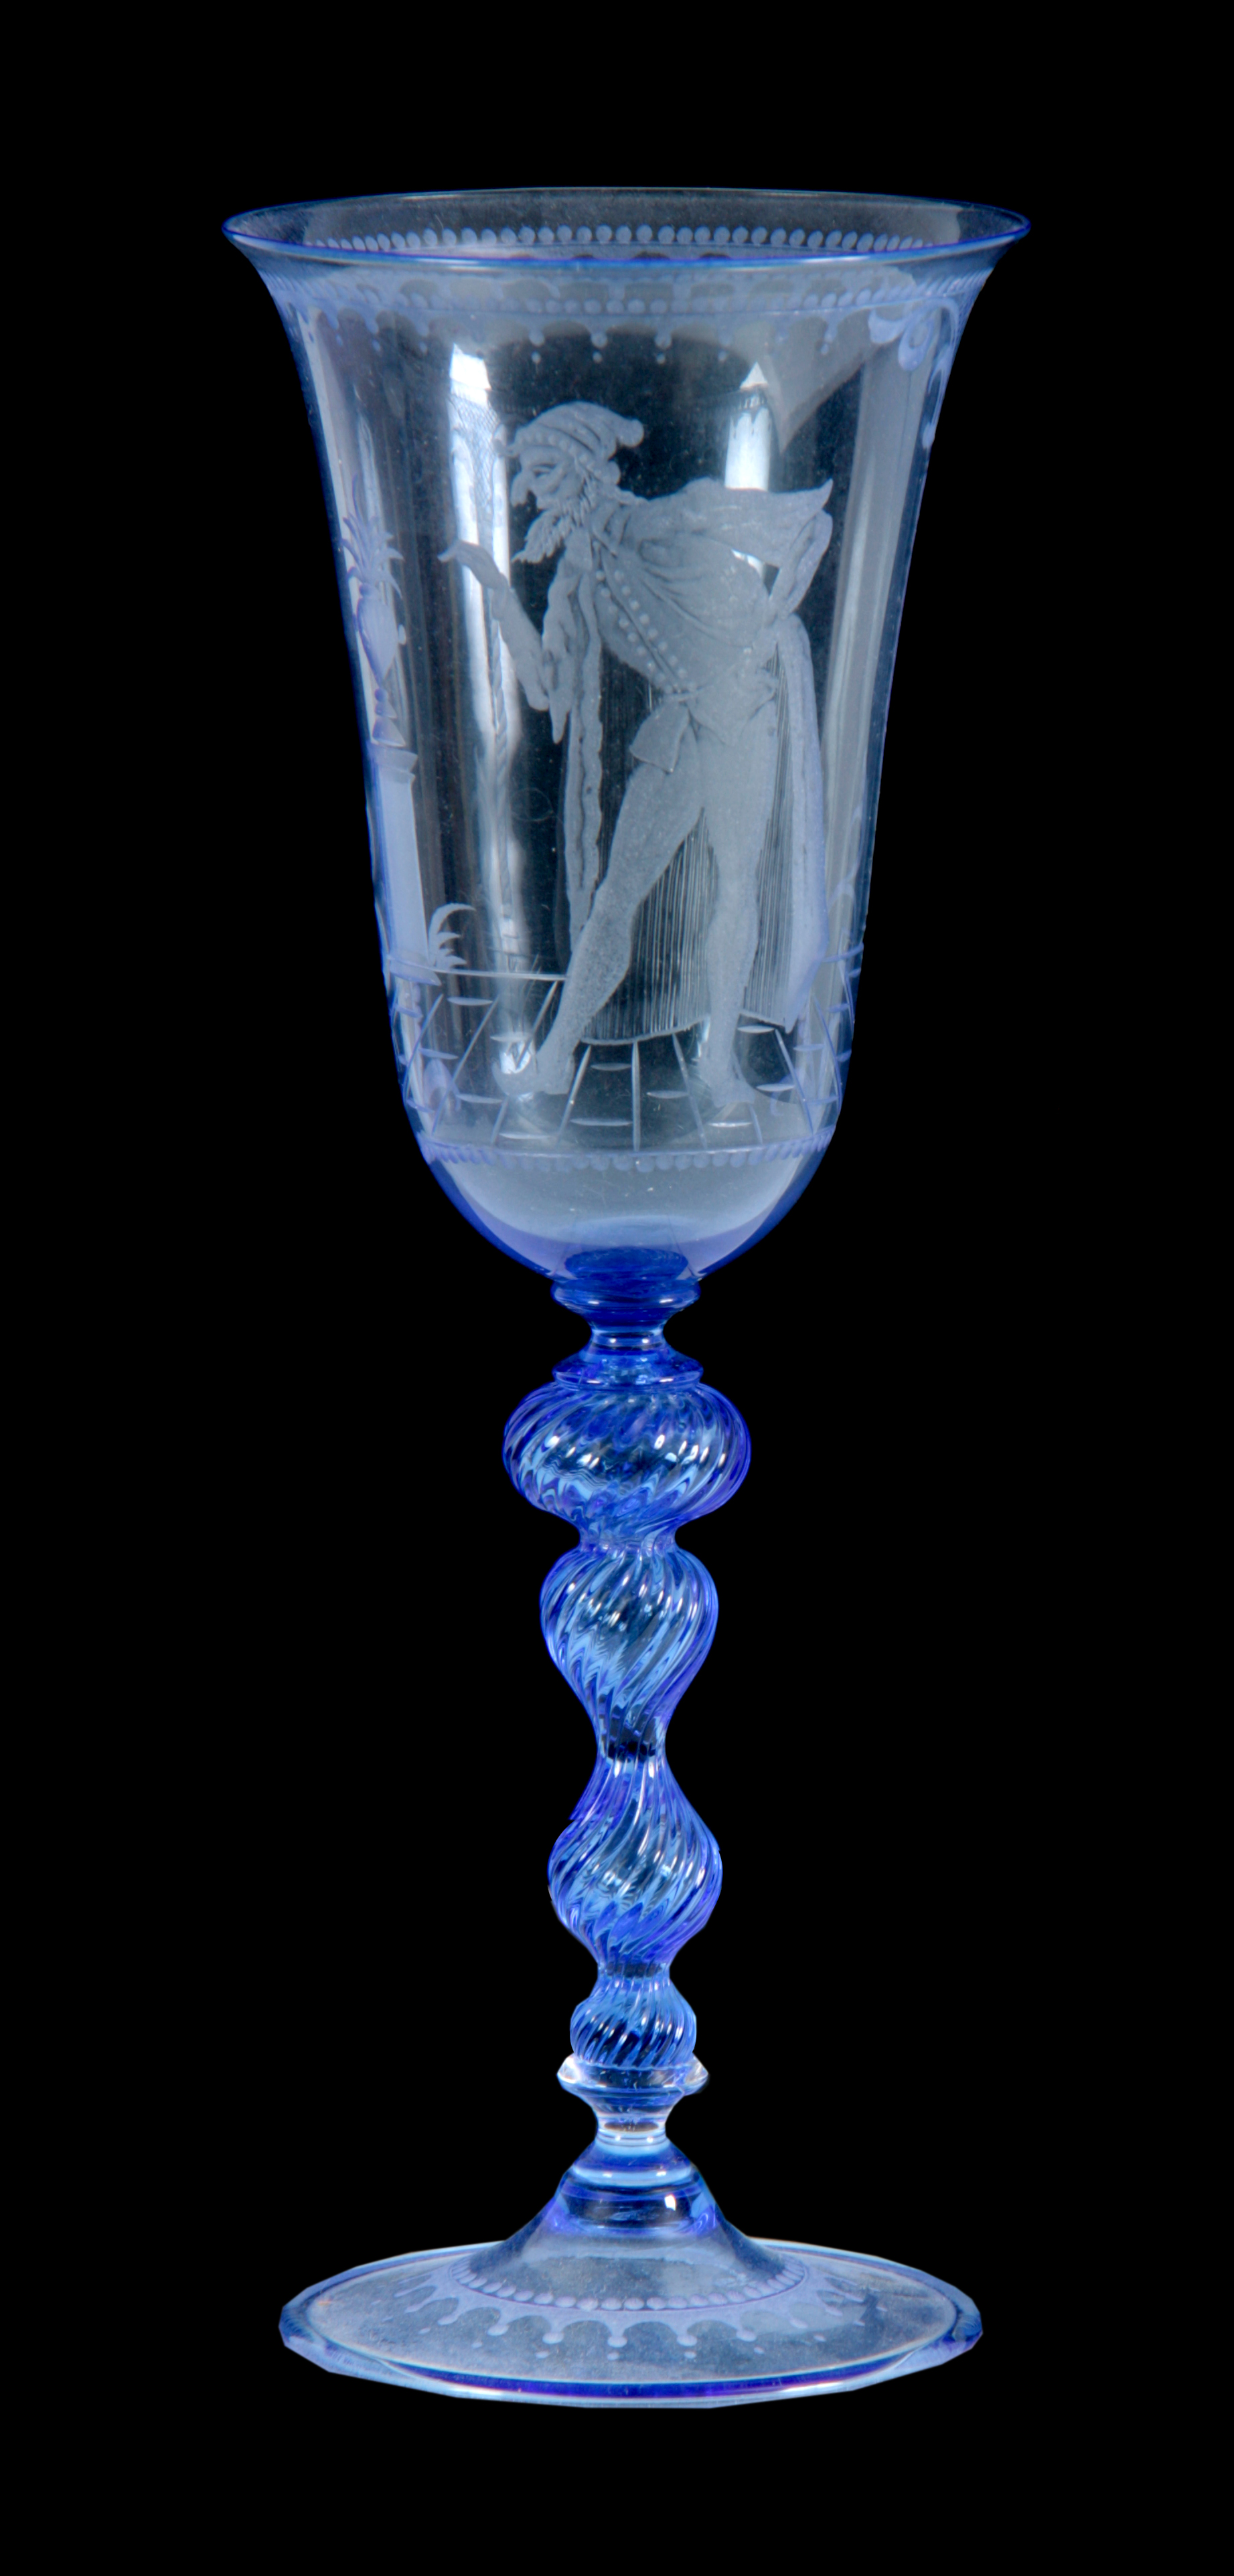 A FINE 20TH CENTURY BLUE STAINED DRINKING GLASS with fluted bowl engraved with a Gentleman set in